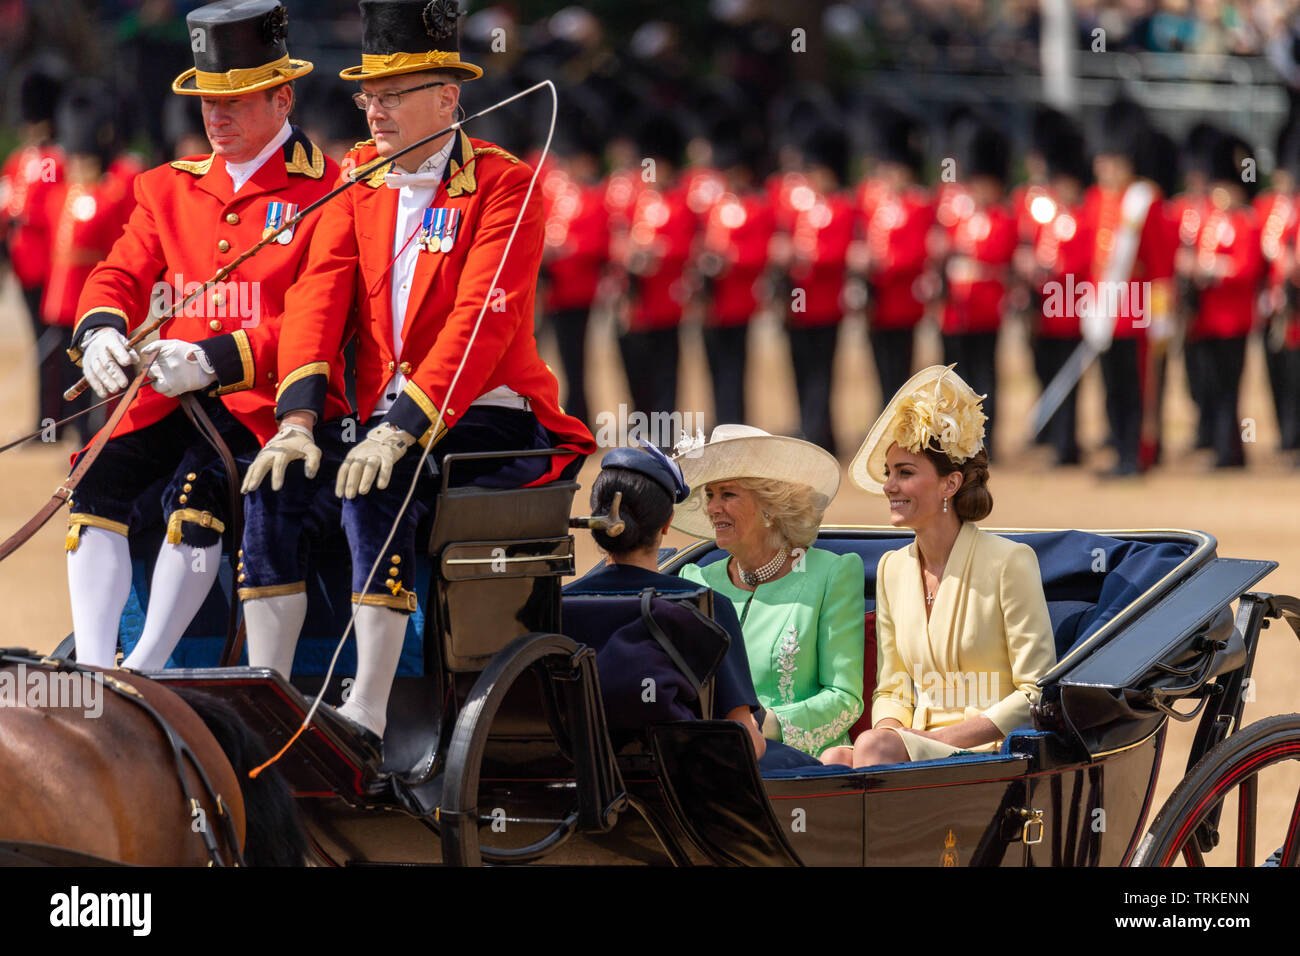 London, UK. 8th June 2019 Trooping the Colour 2019, The Queen's Birthday parade on Horseguards Parade London in the presence of Her Majesty The Queen.  Colour trooped by the 1st Battalion Grenadier Guards Duchess of Cronwall and Duchess of Cambridge arrive  Credit Ian Davidson/Alamy Live News Stock Photo